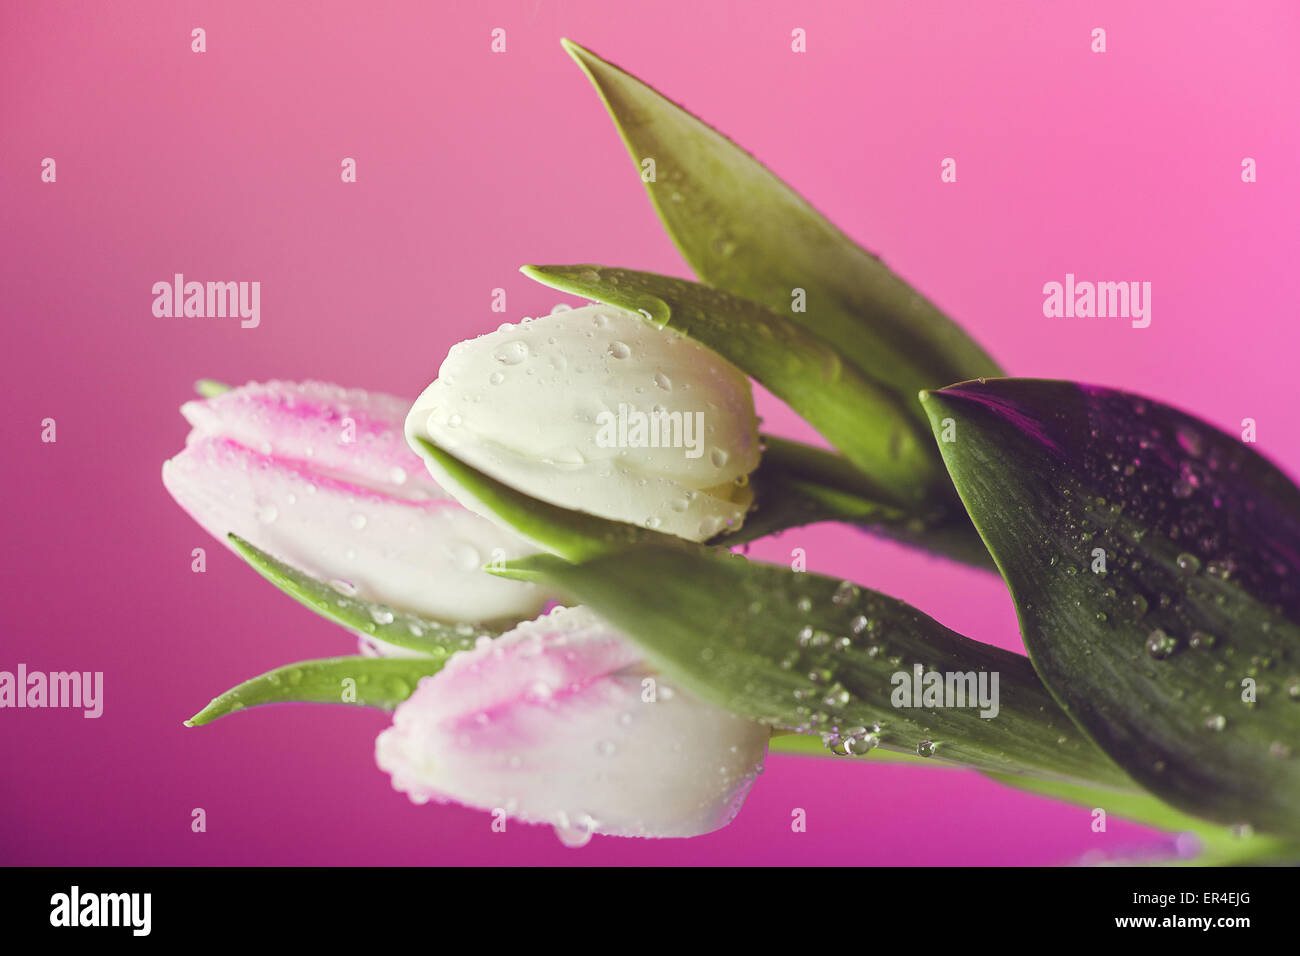 Tulips with water droplets against a pink backdrop Stock Photo